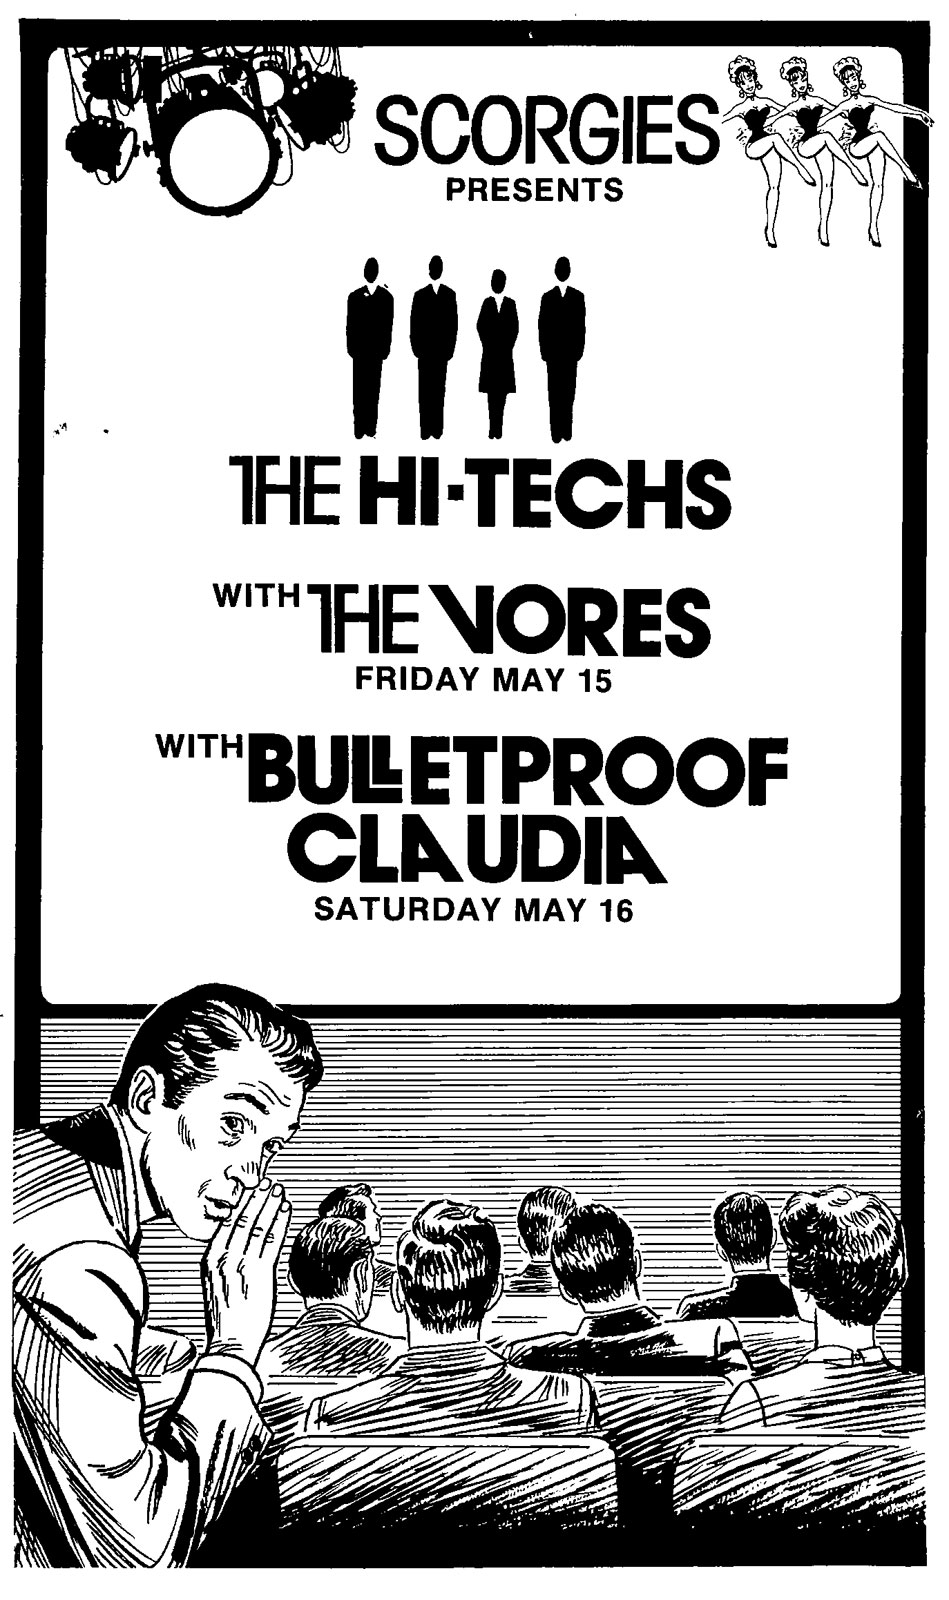 Poster for Hi-Techs with The Vores at Scorgie's in Rochester, New York on Friday 05.15.1981 and Hi-Techs with Bulletproof Claudia on Saturday 05.16.1981